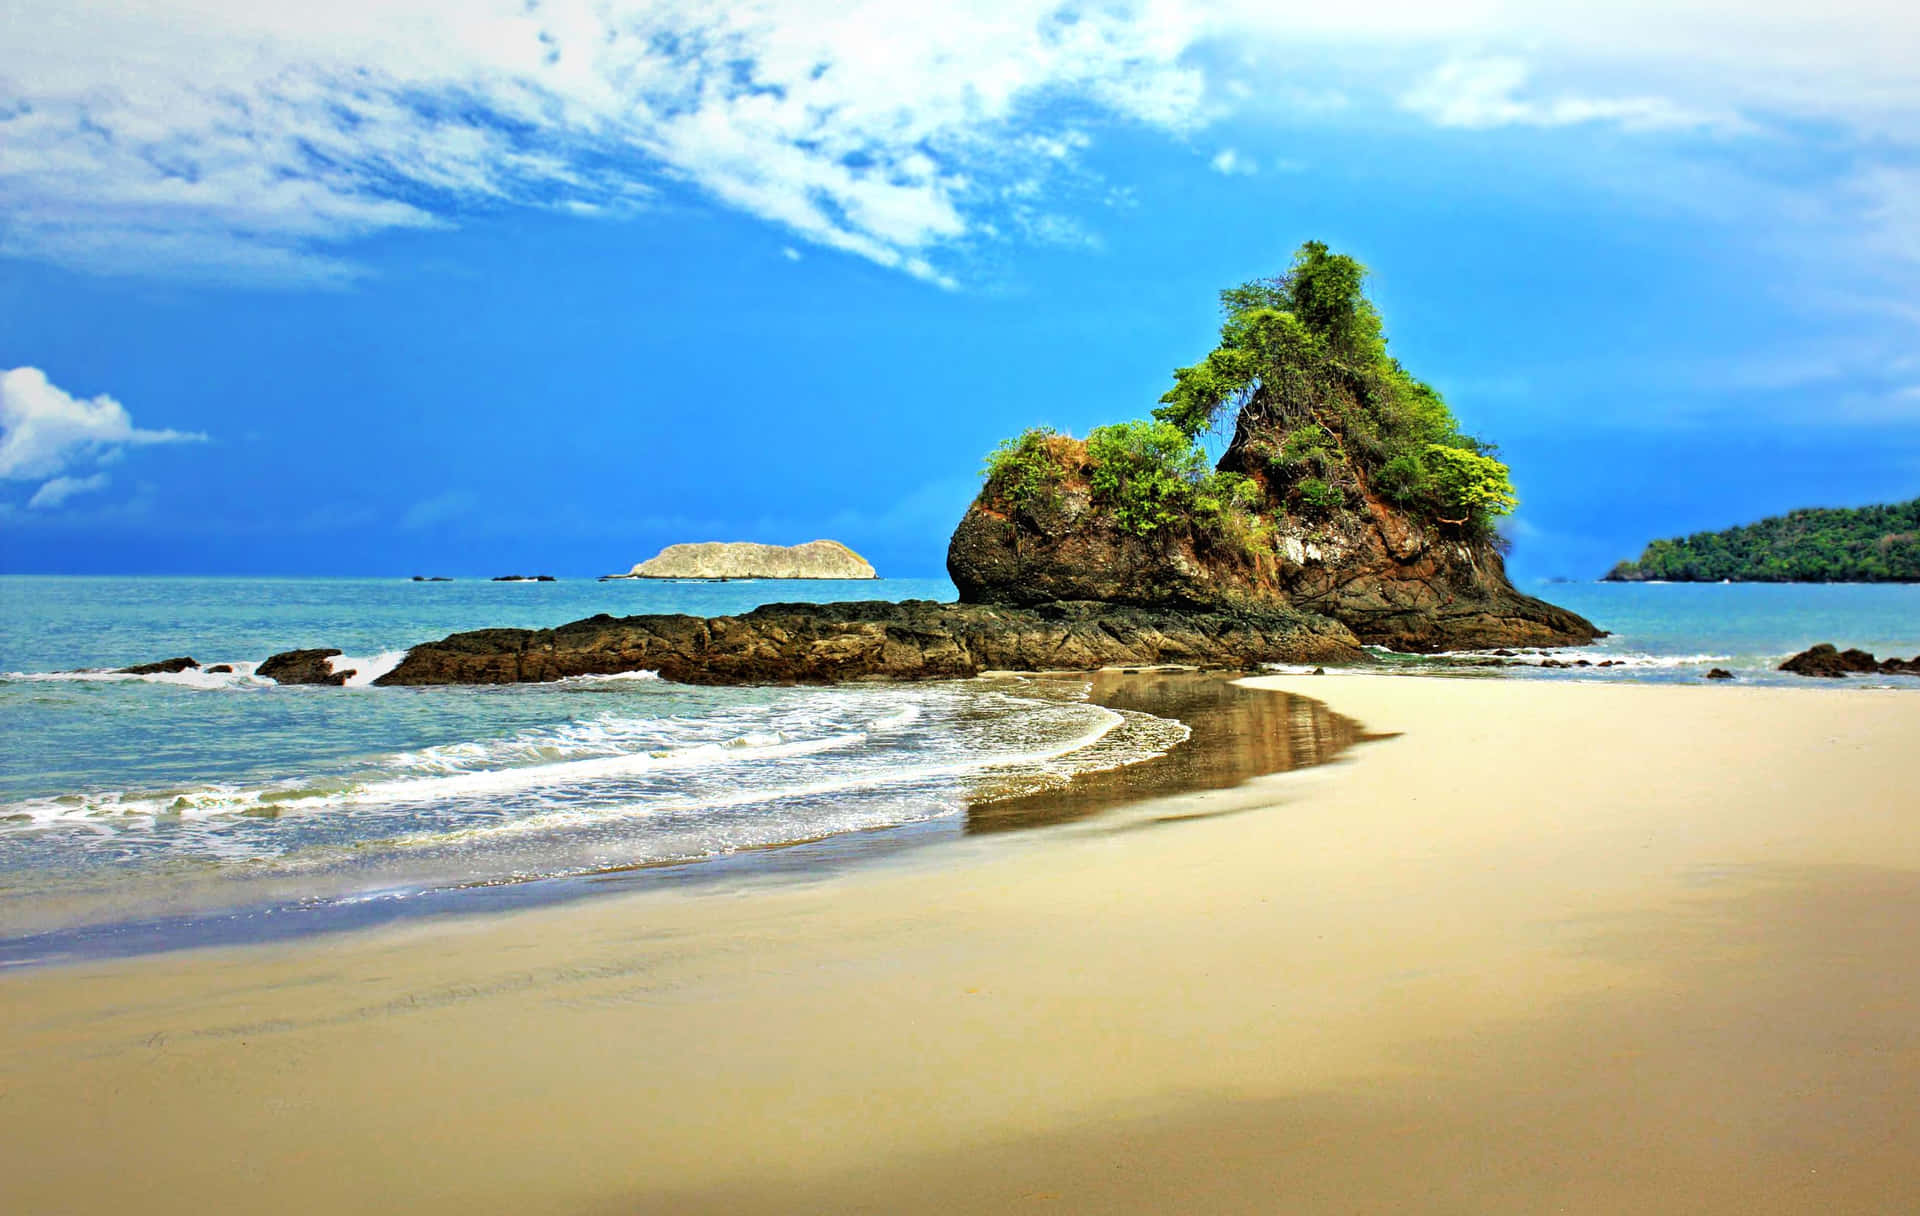 Spend your next dream holiday in Costa Rica - the ultimate paradise